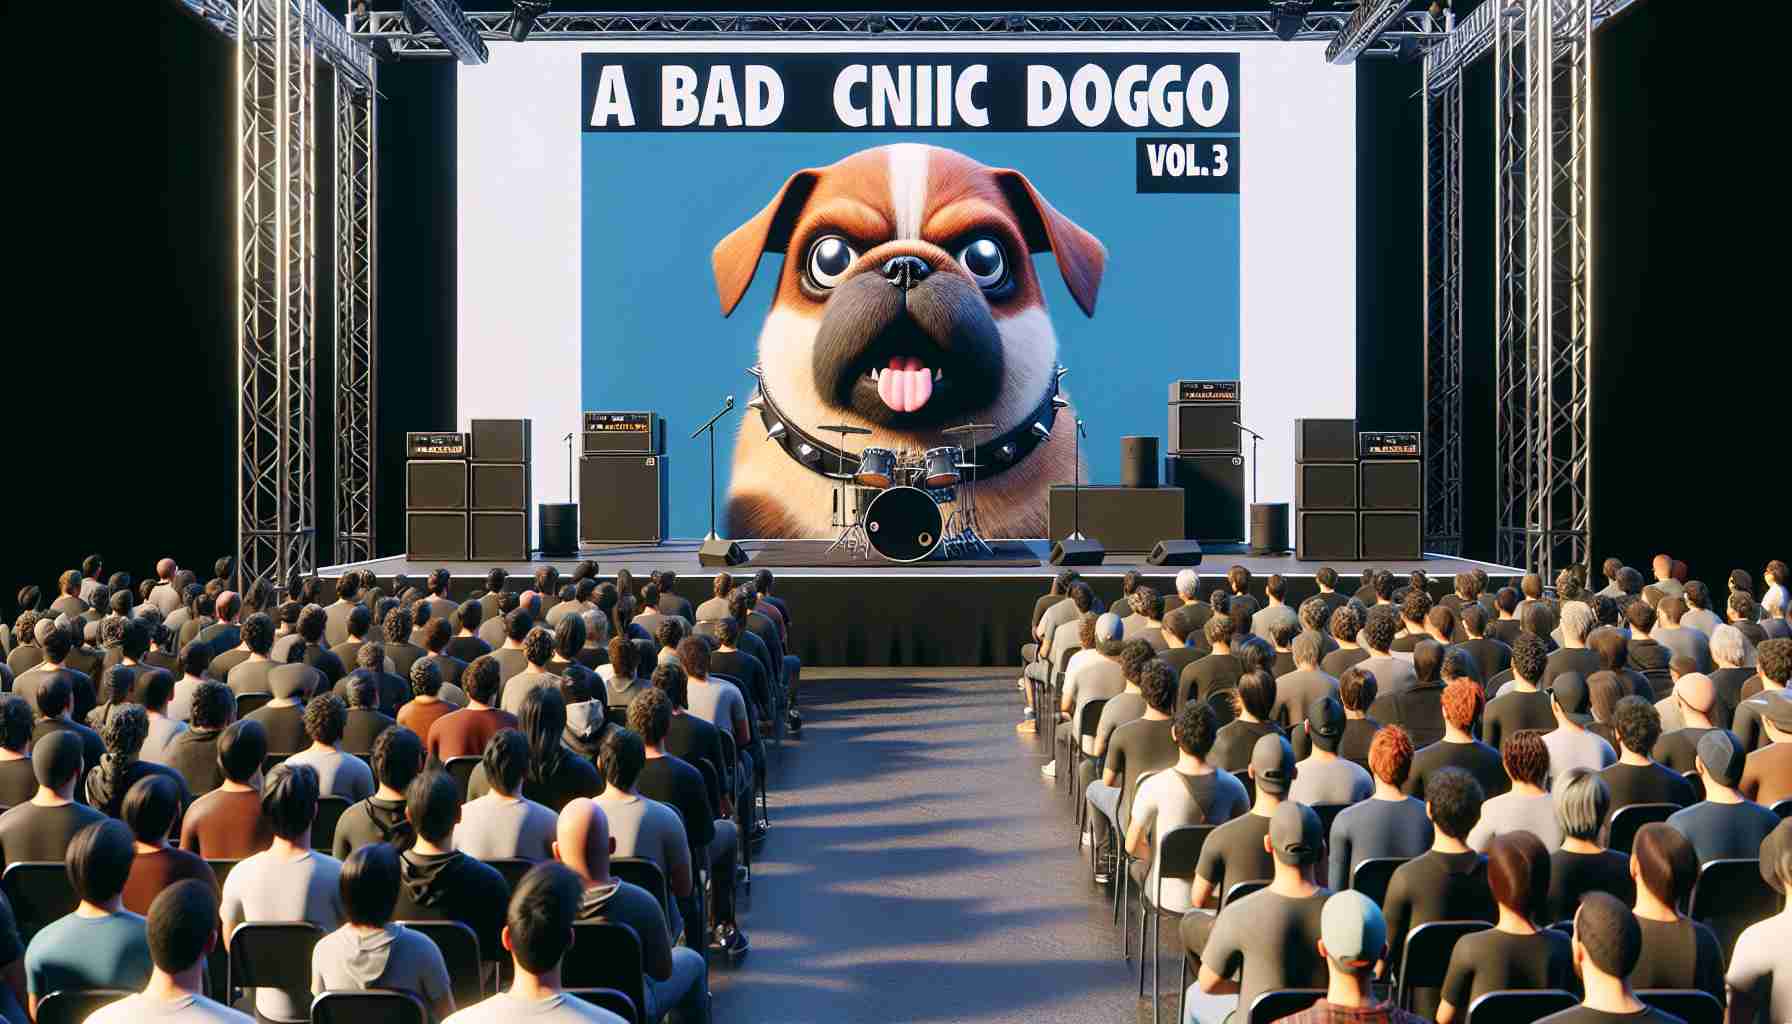 New Virtual Event “A Bad Cynic Doggo Vol. 3” Takes Center Stage